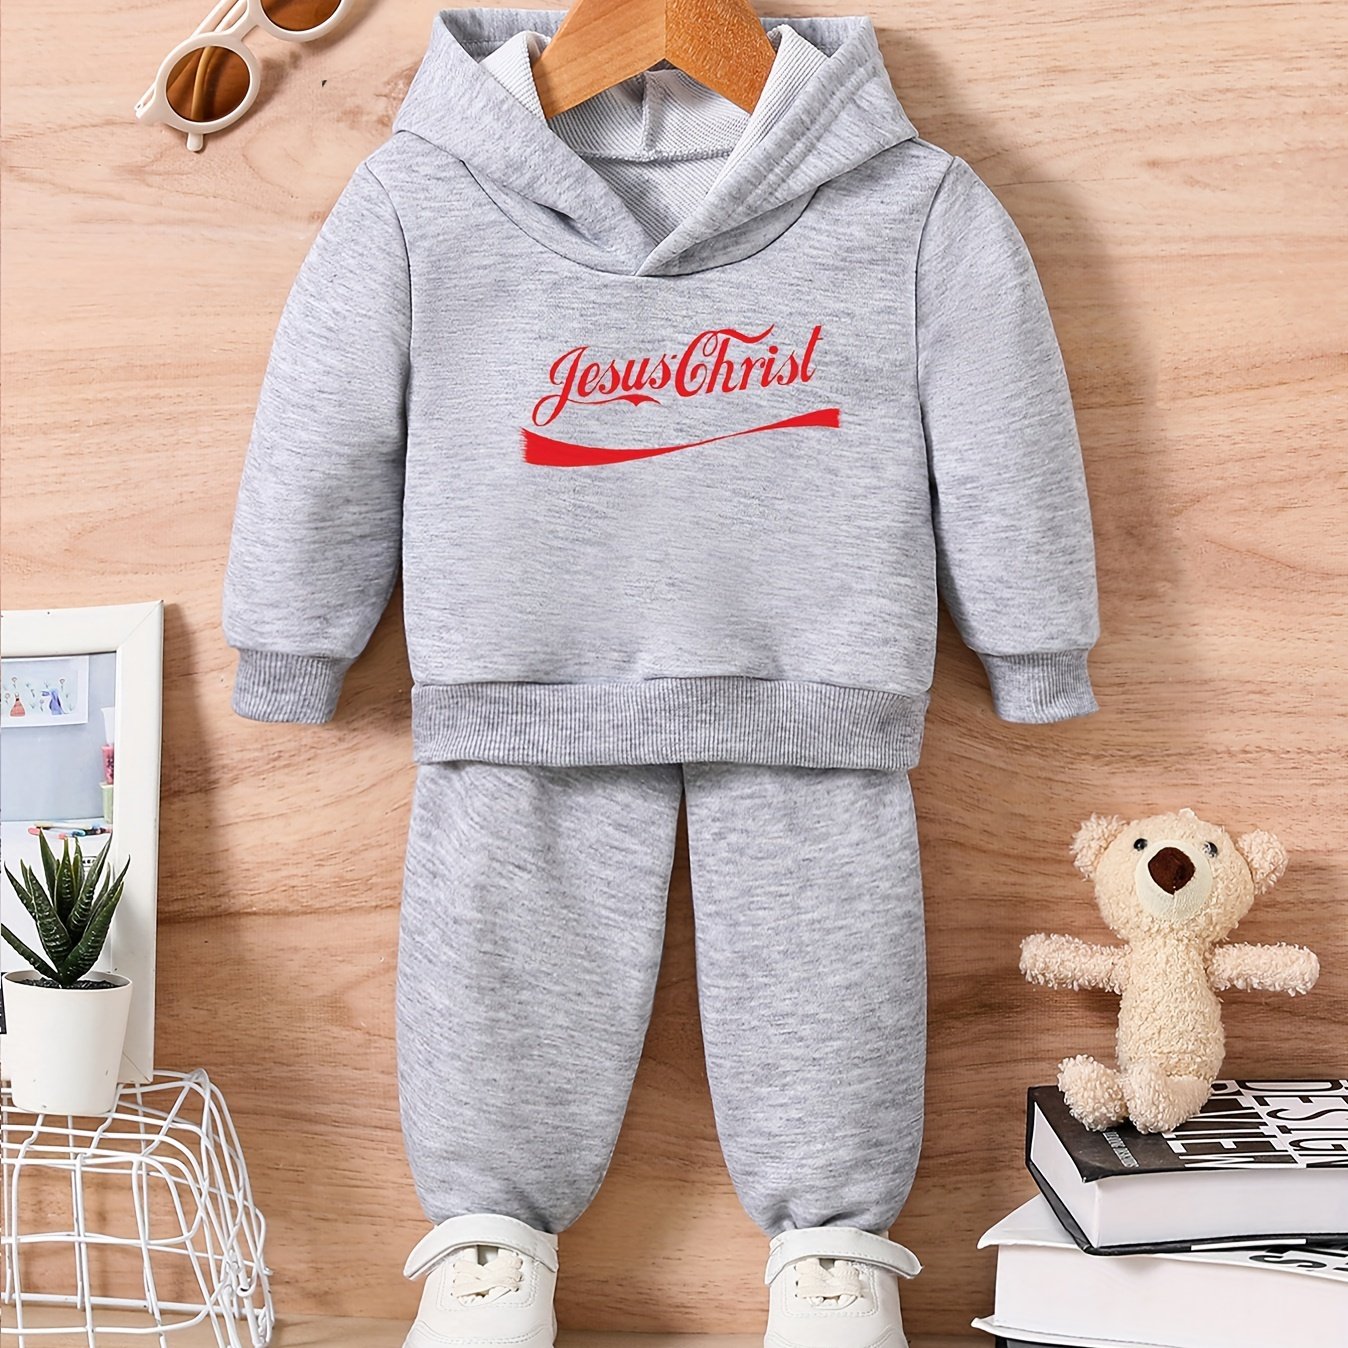 Jesus Christ Toddler Christian Casual Outfit claimedbygoddesigns